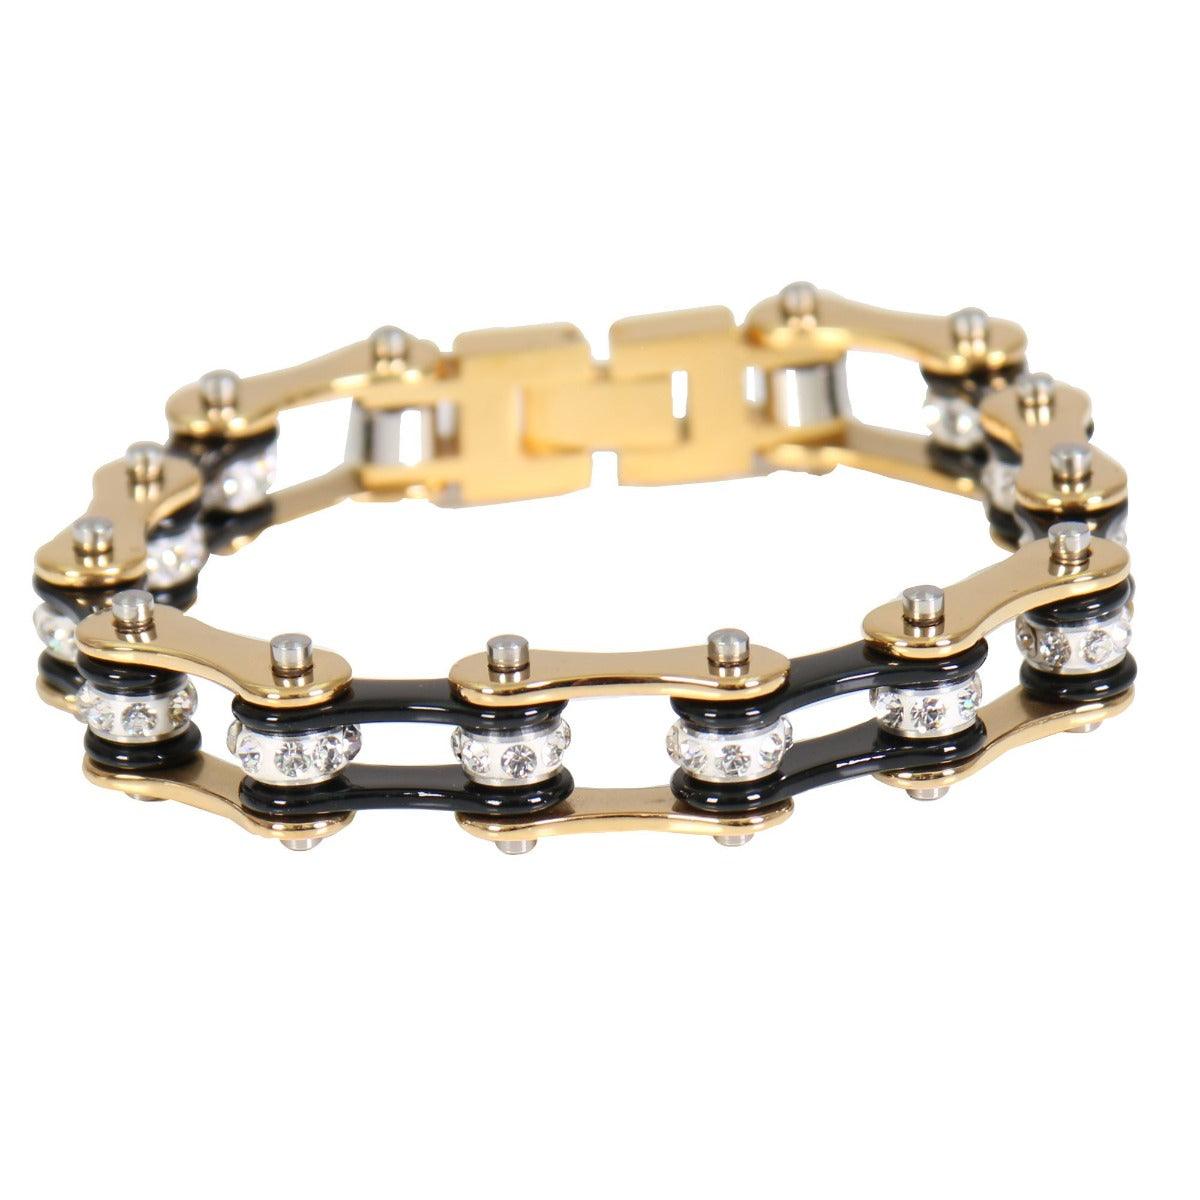 Hot Leathers 2 Tone Bracelet With Crystals Black/Gold - American Legend Rider